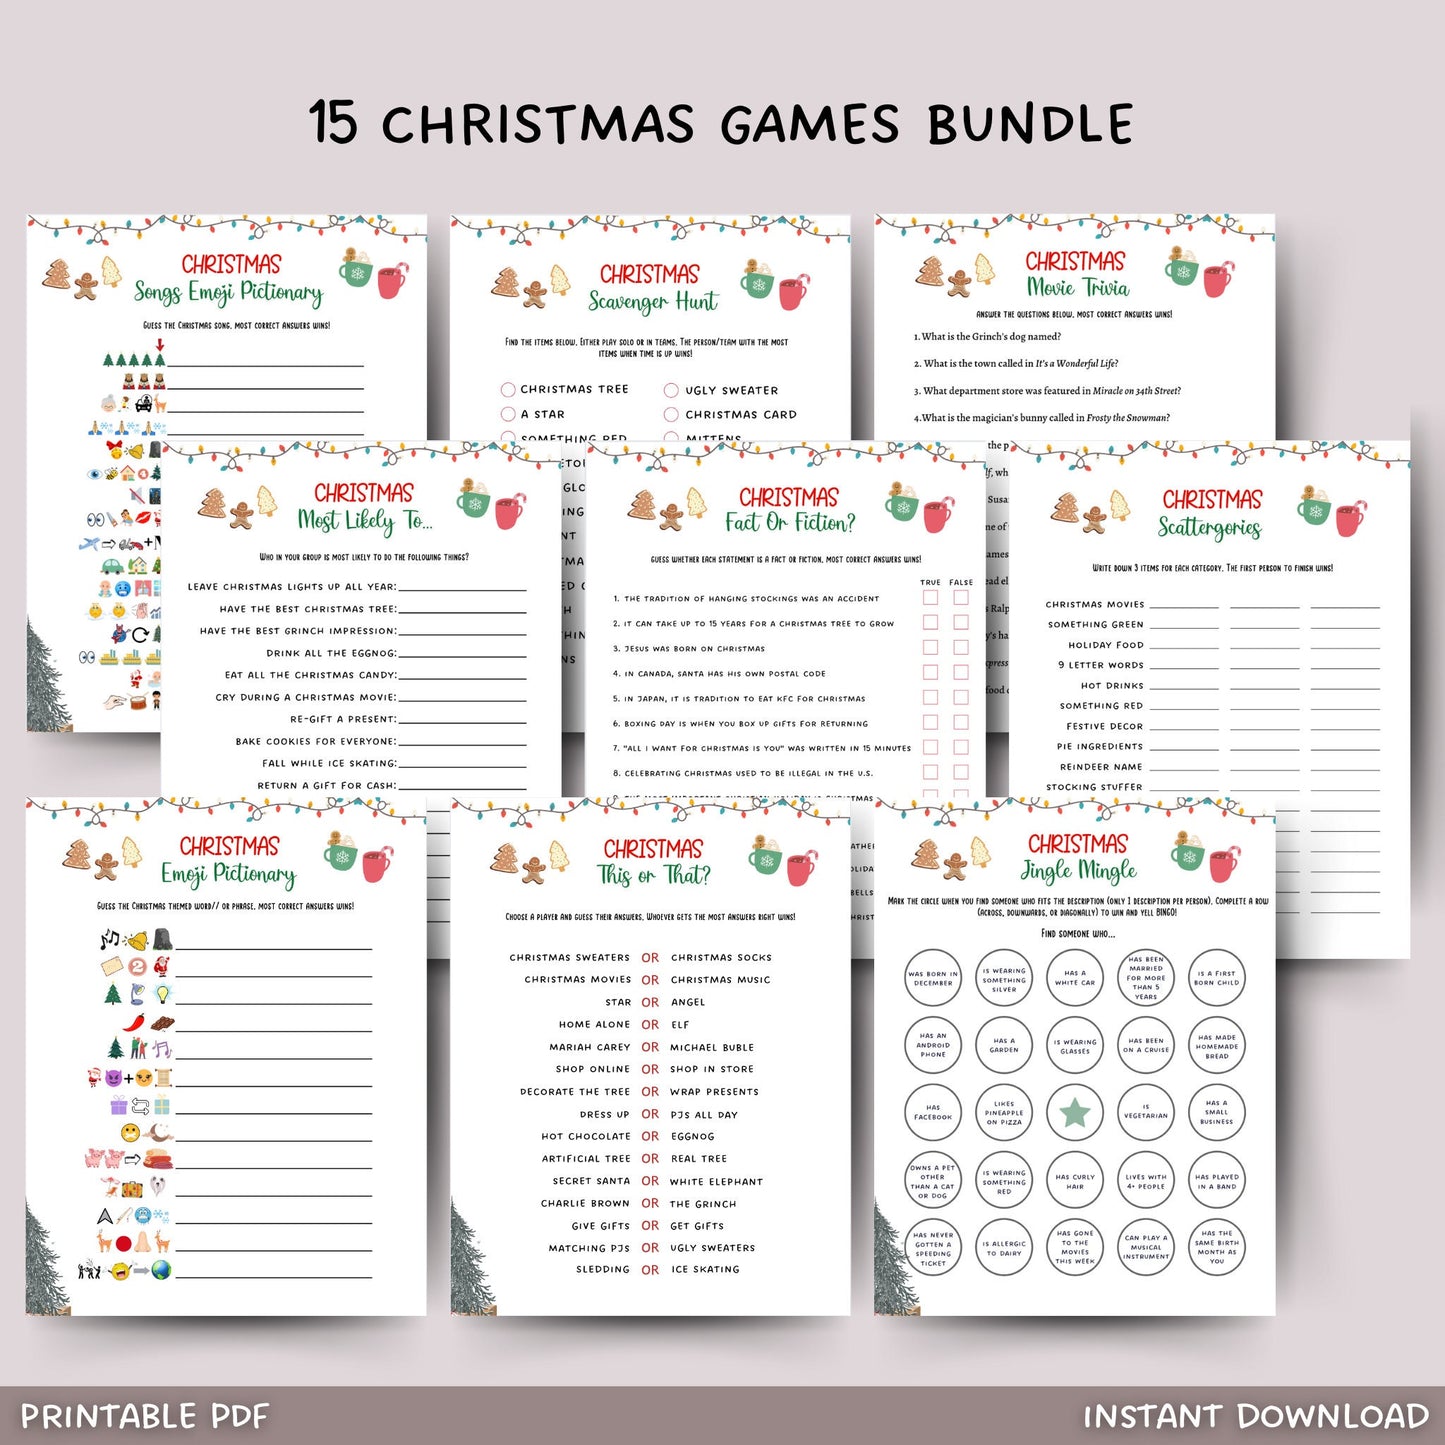 This Christmas games 15 pack bundle is a printable PDF and an instant digital download! It is perfect for any party, event or get together and works great for adults and kids! Just download, print, and play!